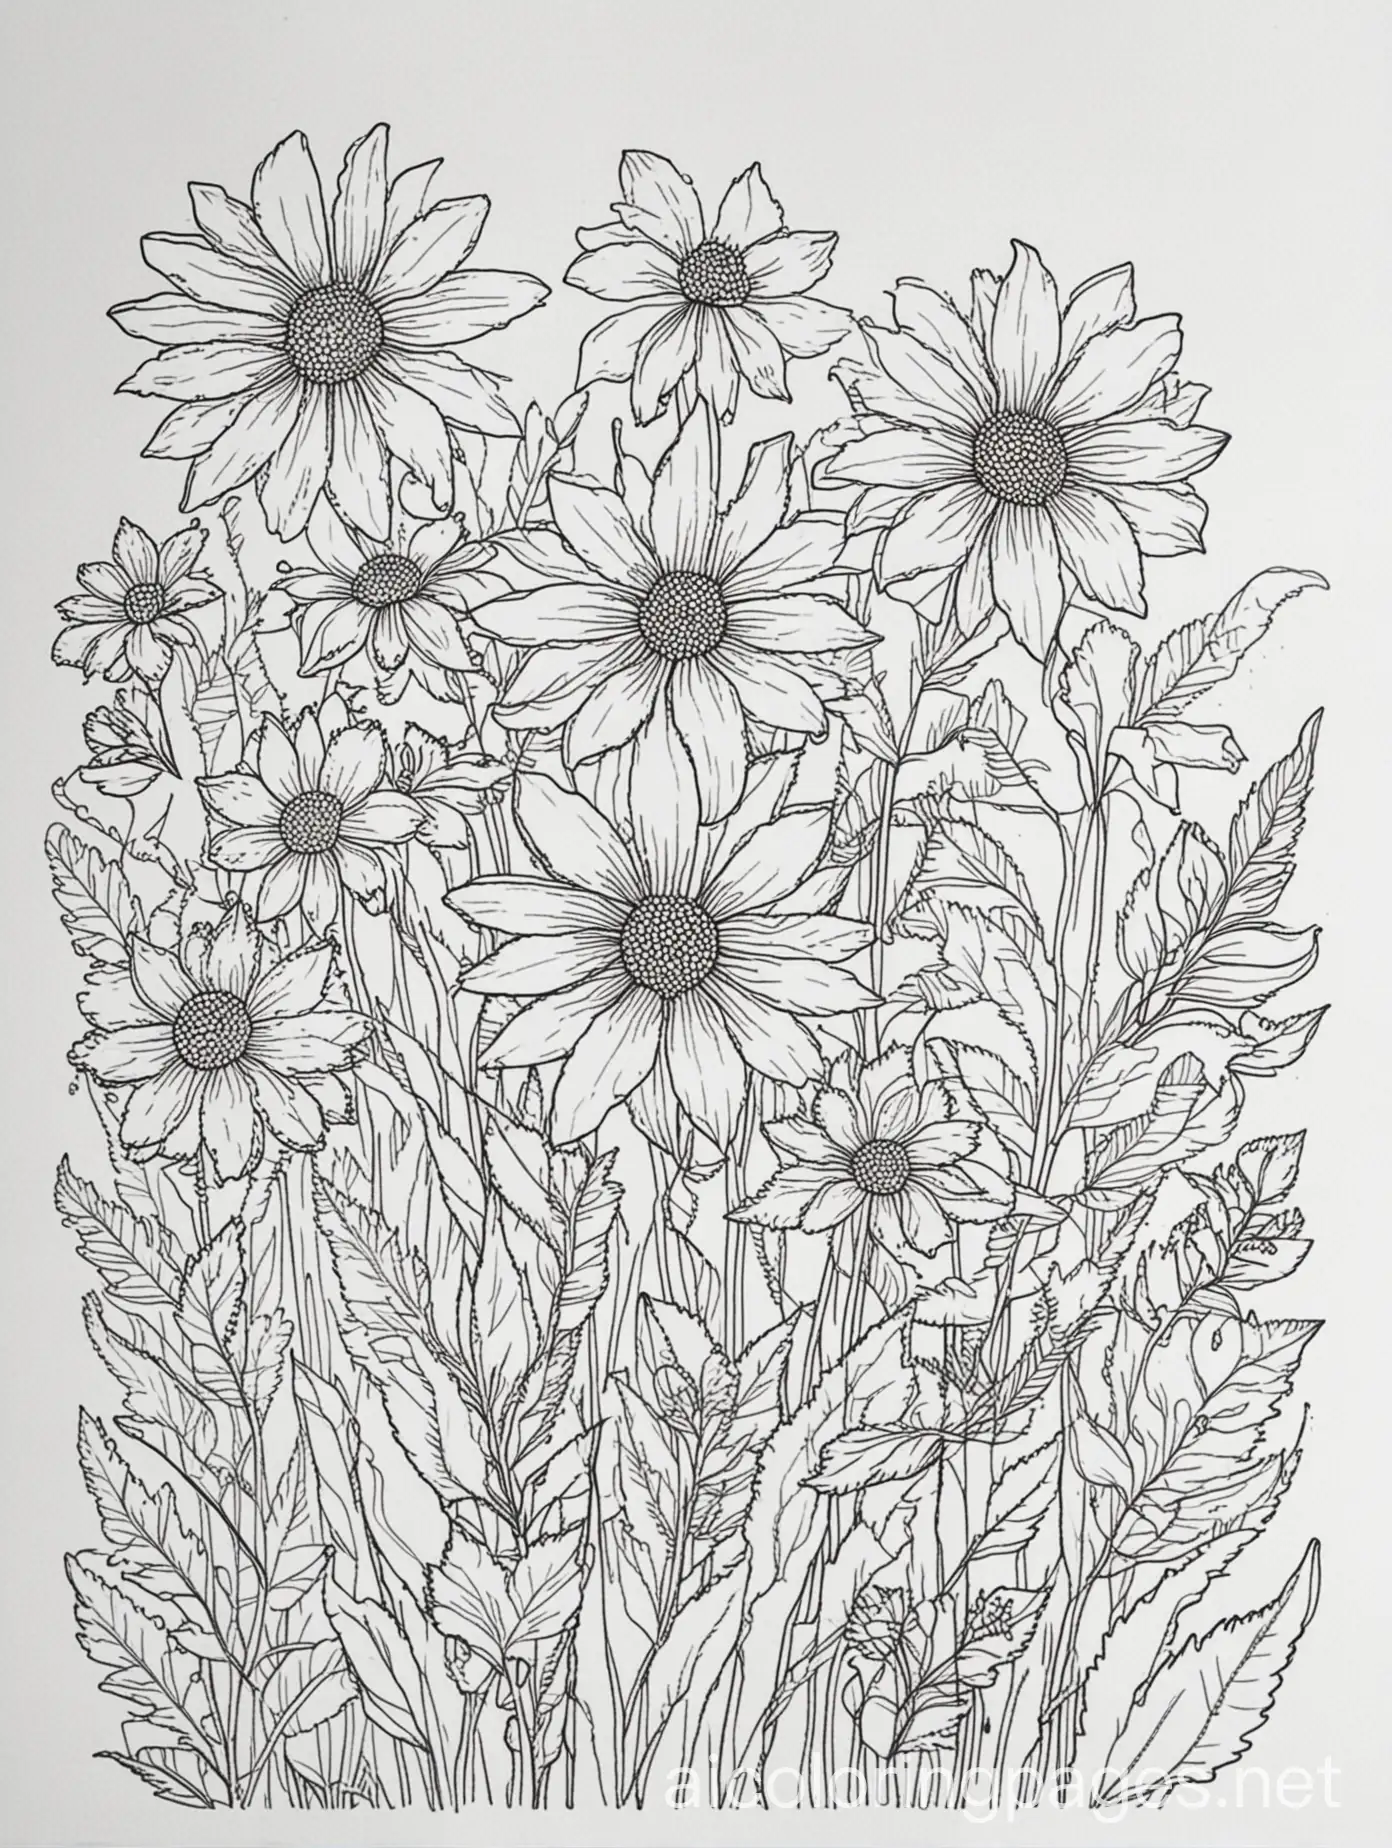 colouring page wildflowers, Coloring Page, black and white, line art, white background, Simplicity, Ample White Space. The background of the coloring page is plain white to make it easy for young children to color within the lines. The outlines of all the subjects are easy to distinguish, making it simple for kids to color without too much difficulty, Coloring Page, black and white, line art, white background, Simplicity, Ample White Space. The background of the coloring page is plain white to make it easy for young children to color within the lines. The outlines of all the subjects are easy to distinguish, making it simple for kids to color without too much difficulty